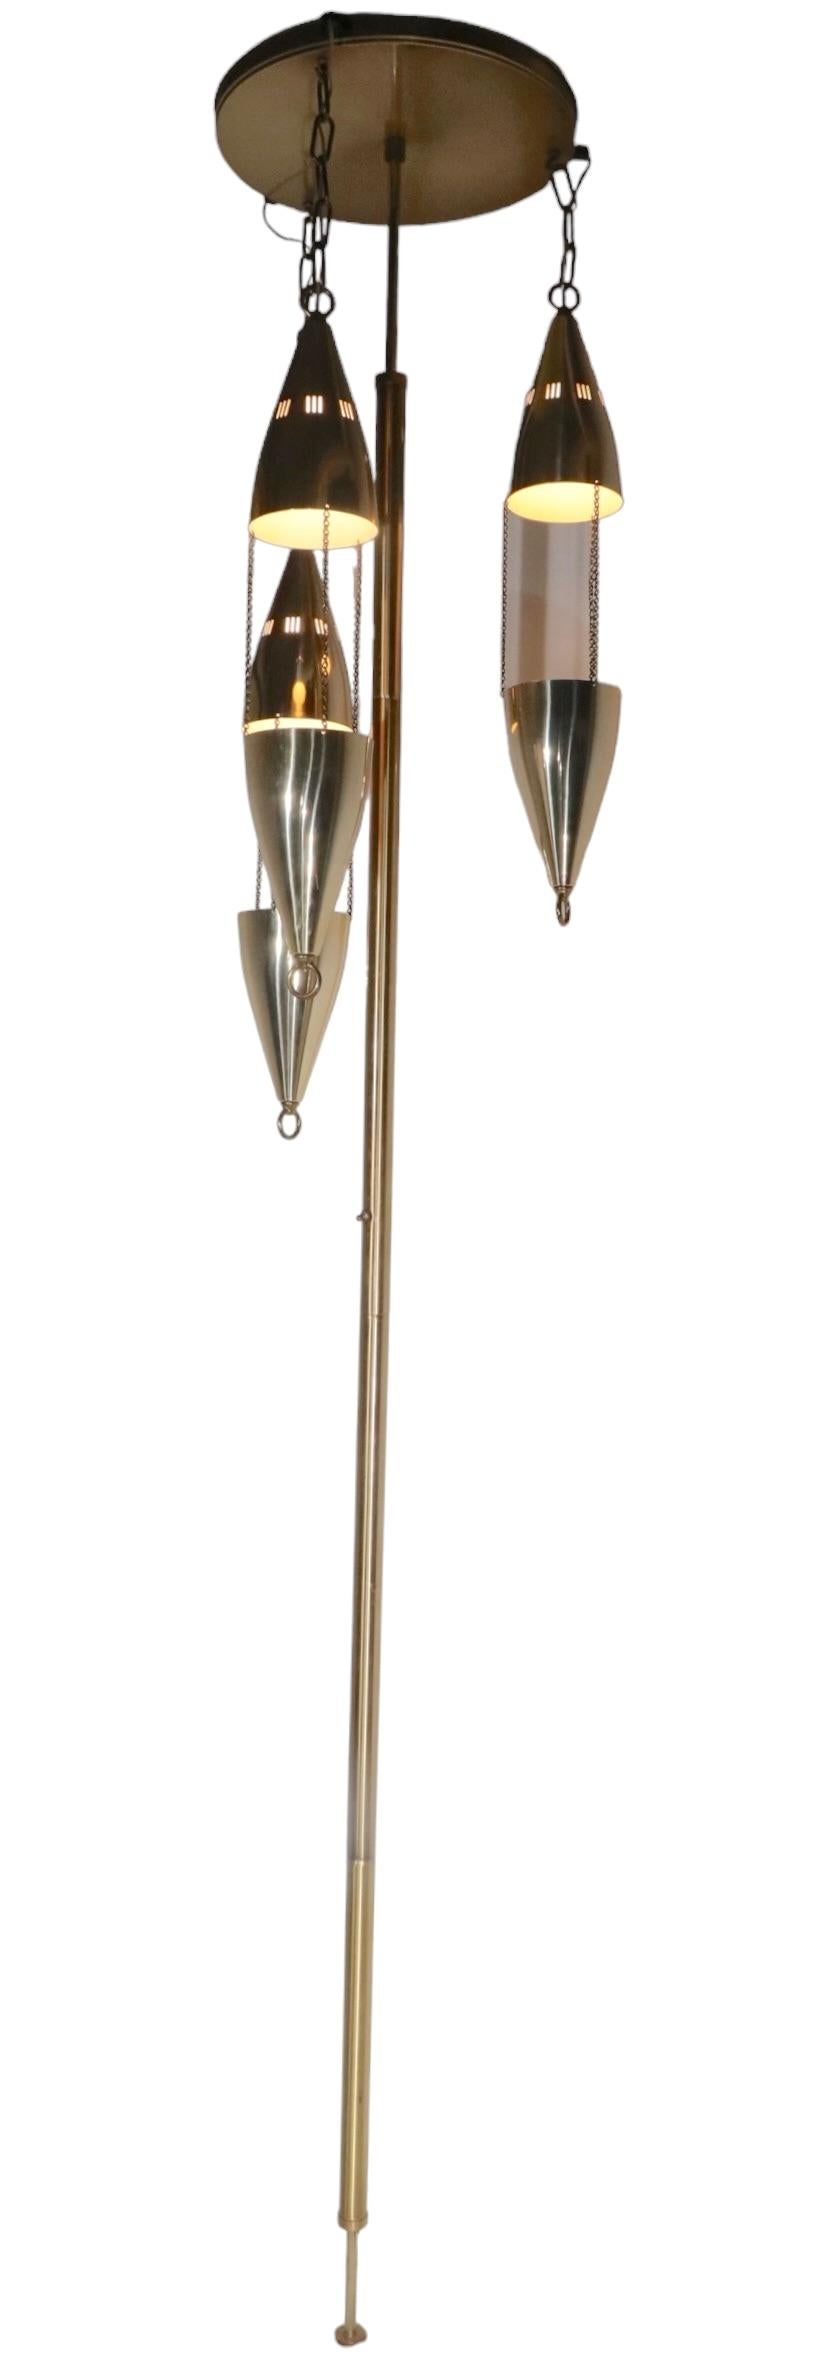 Architectural Mid Century Tension Pole Lamp c 1950- 1960's 7